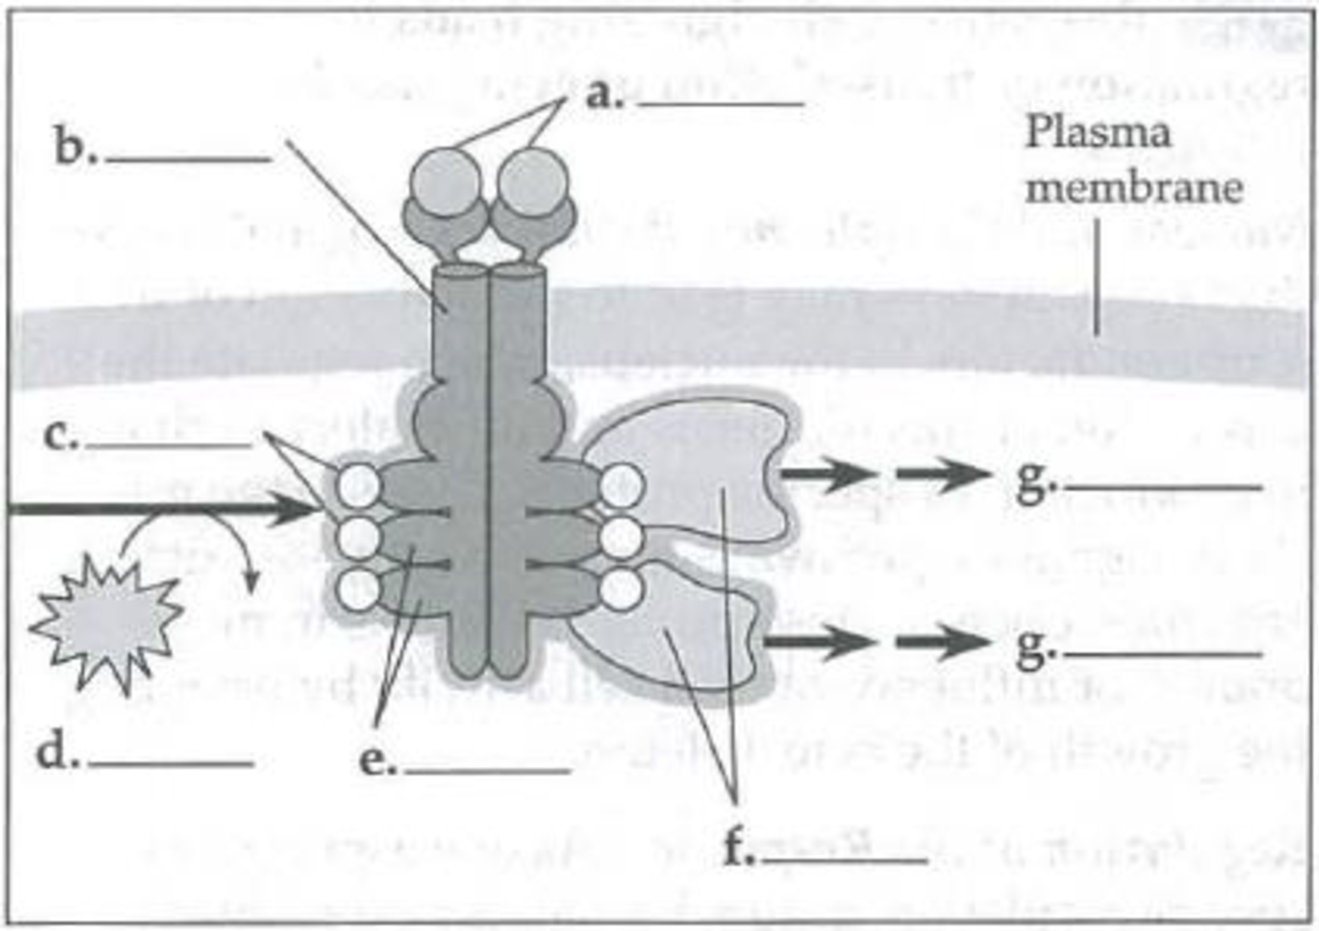 Chapter 11, Problem 3IQ, Label the parts in the following diagram of an activated receptor tyrosine kinase dimer. 